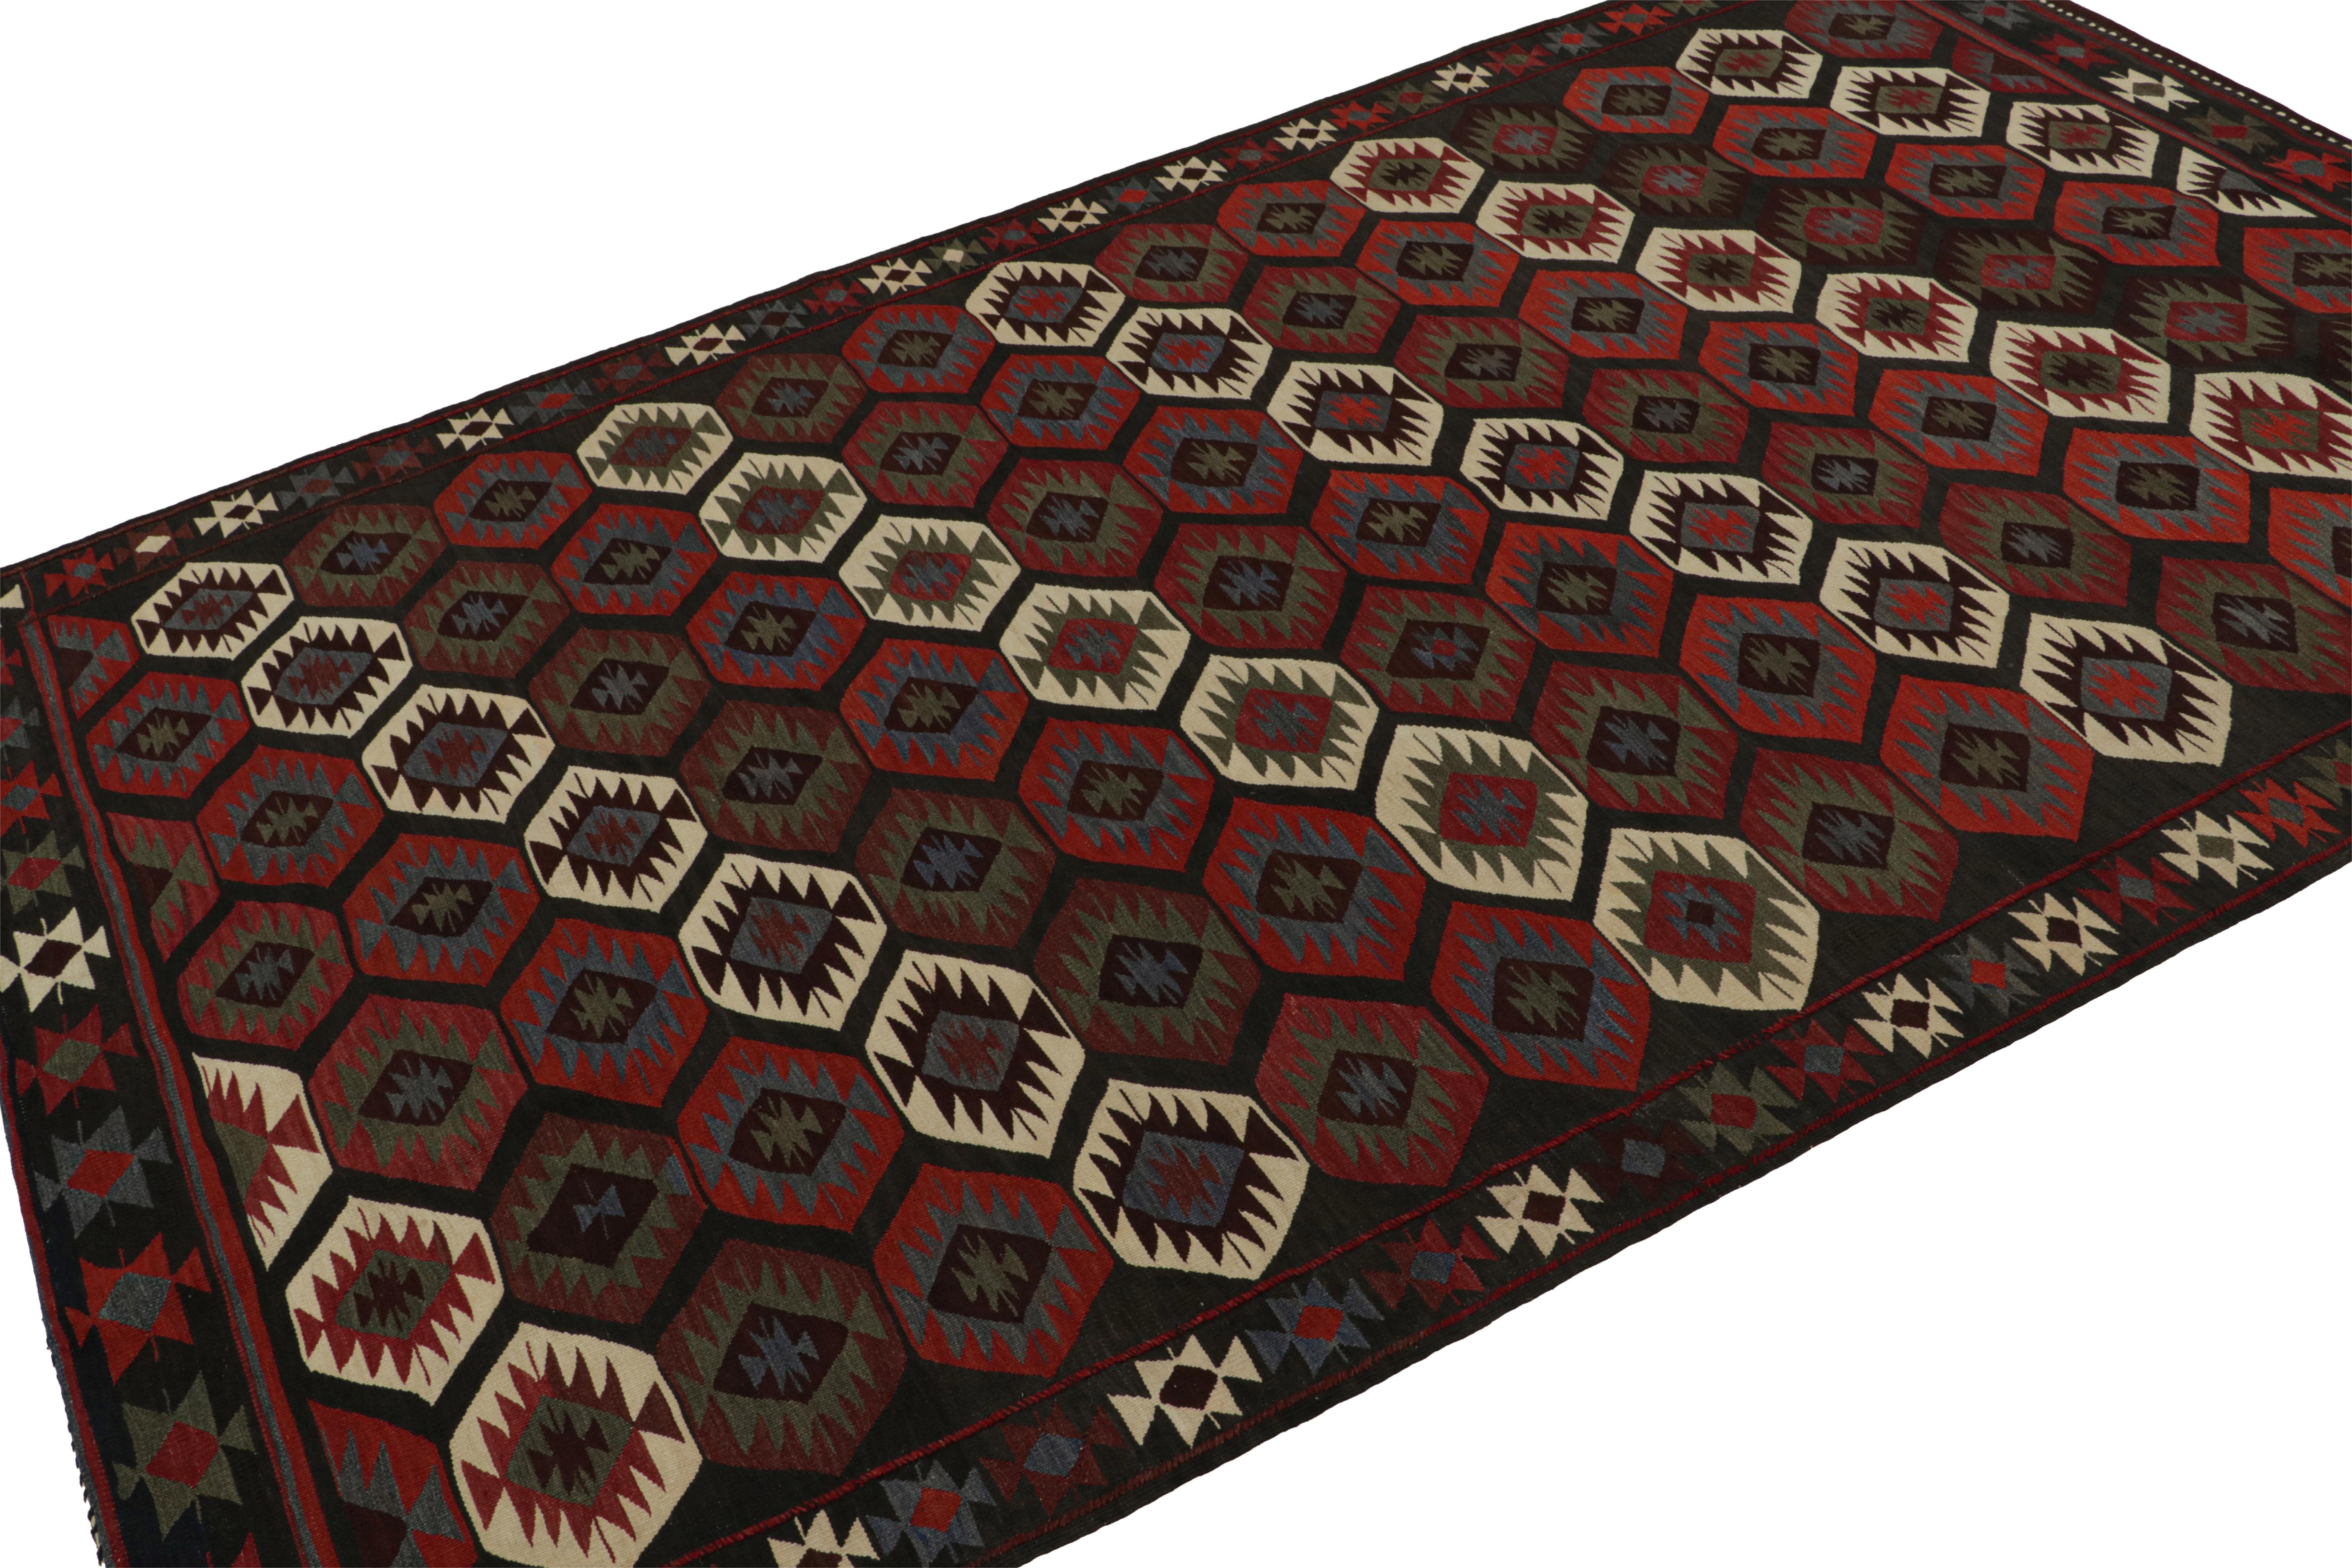 This vintage 5x9 Persian Kilim is a mid-century tribal rug - latest to join our Kilim & Flatweave collection. 

On the Design:

Handwoven in wool circa 1950-1960, the flatweave enjoys tribal patterns in red & blue. Keen eyes will note subtle color